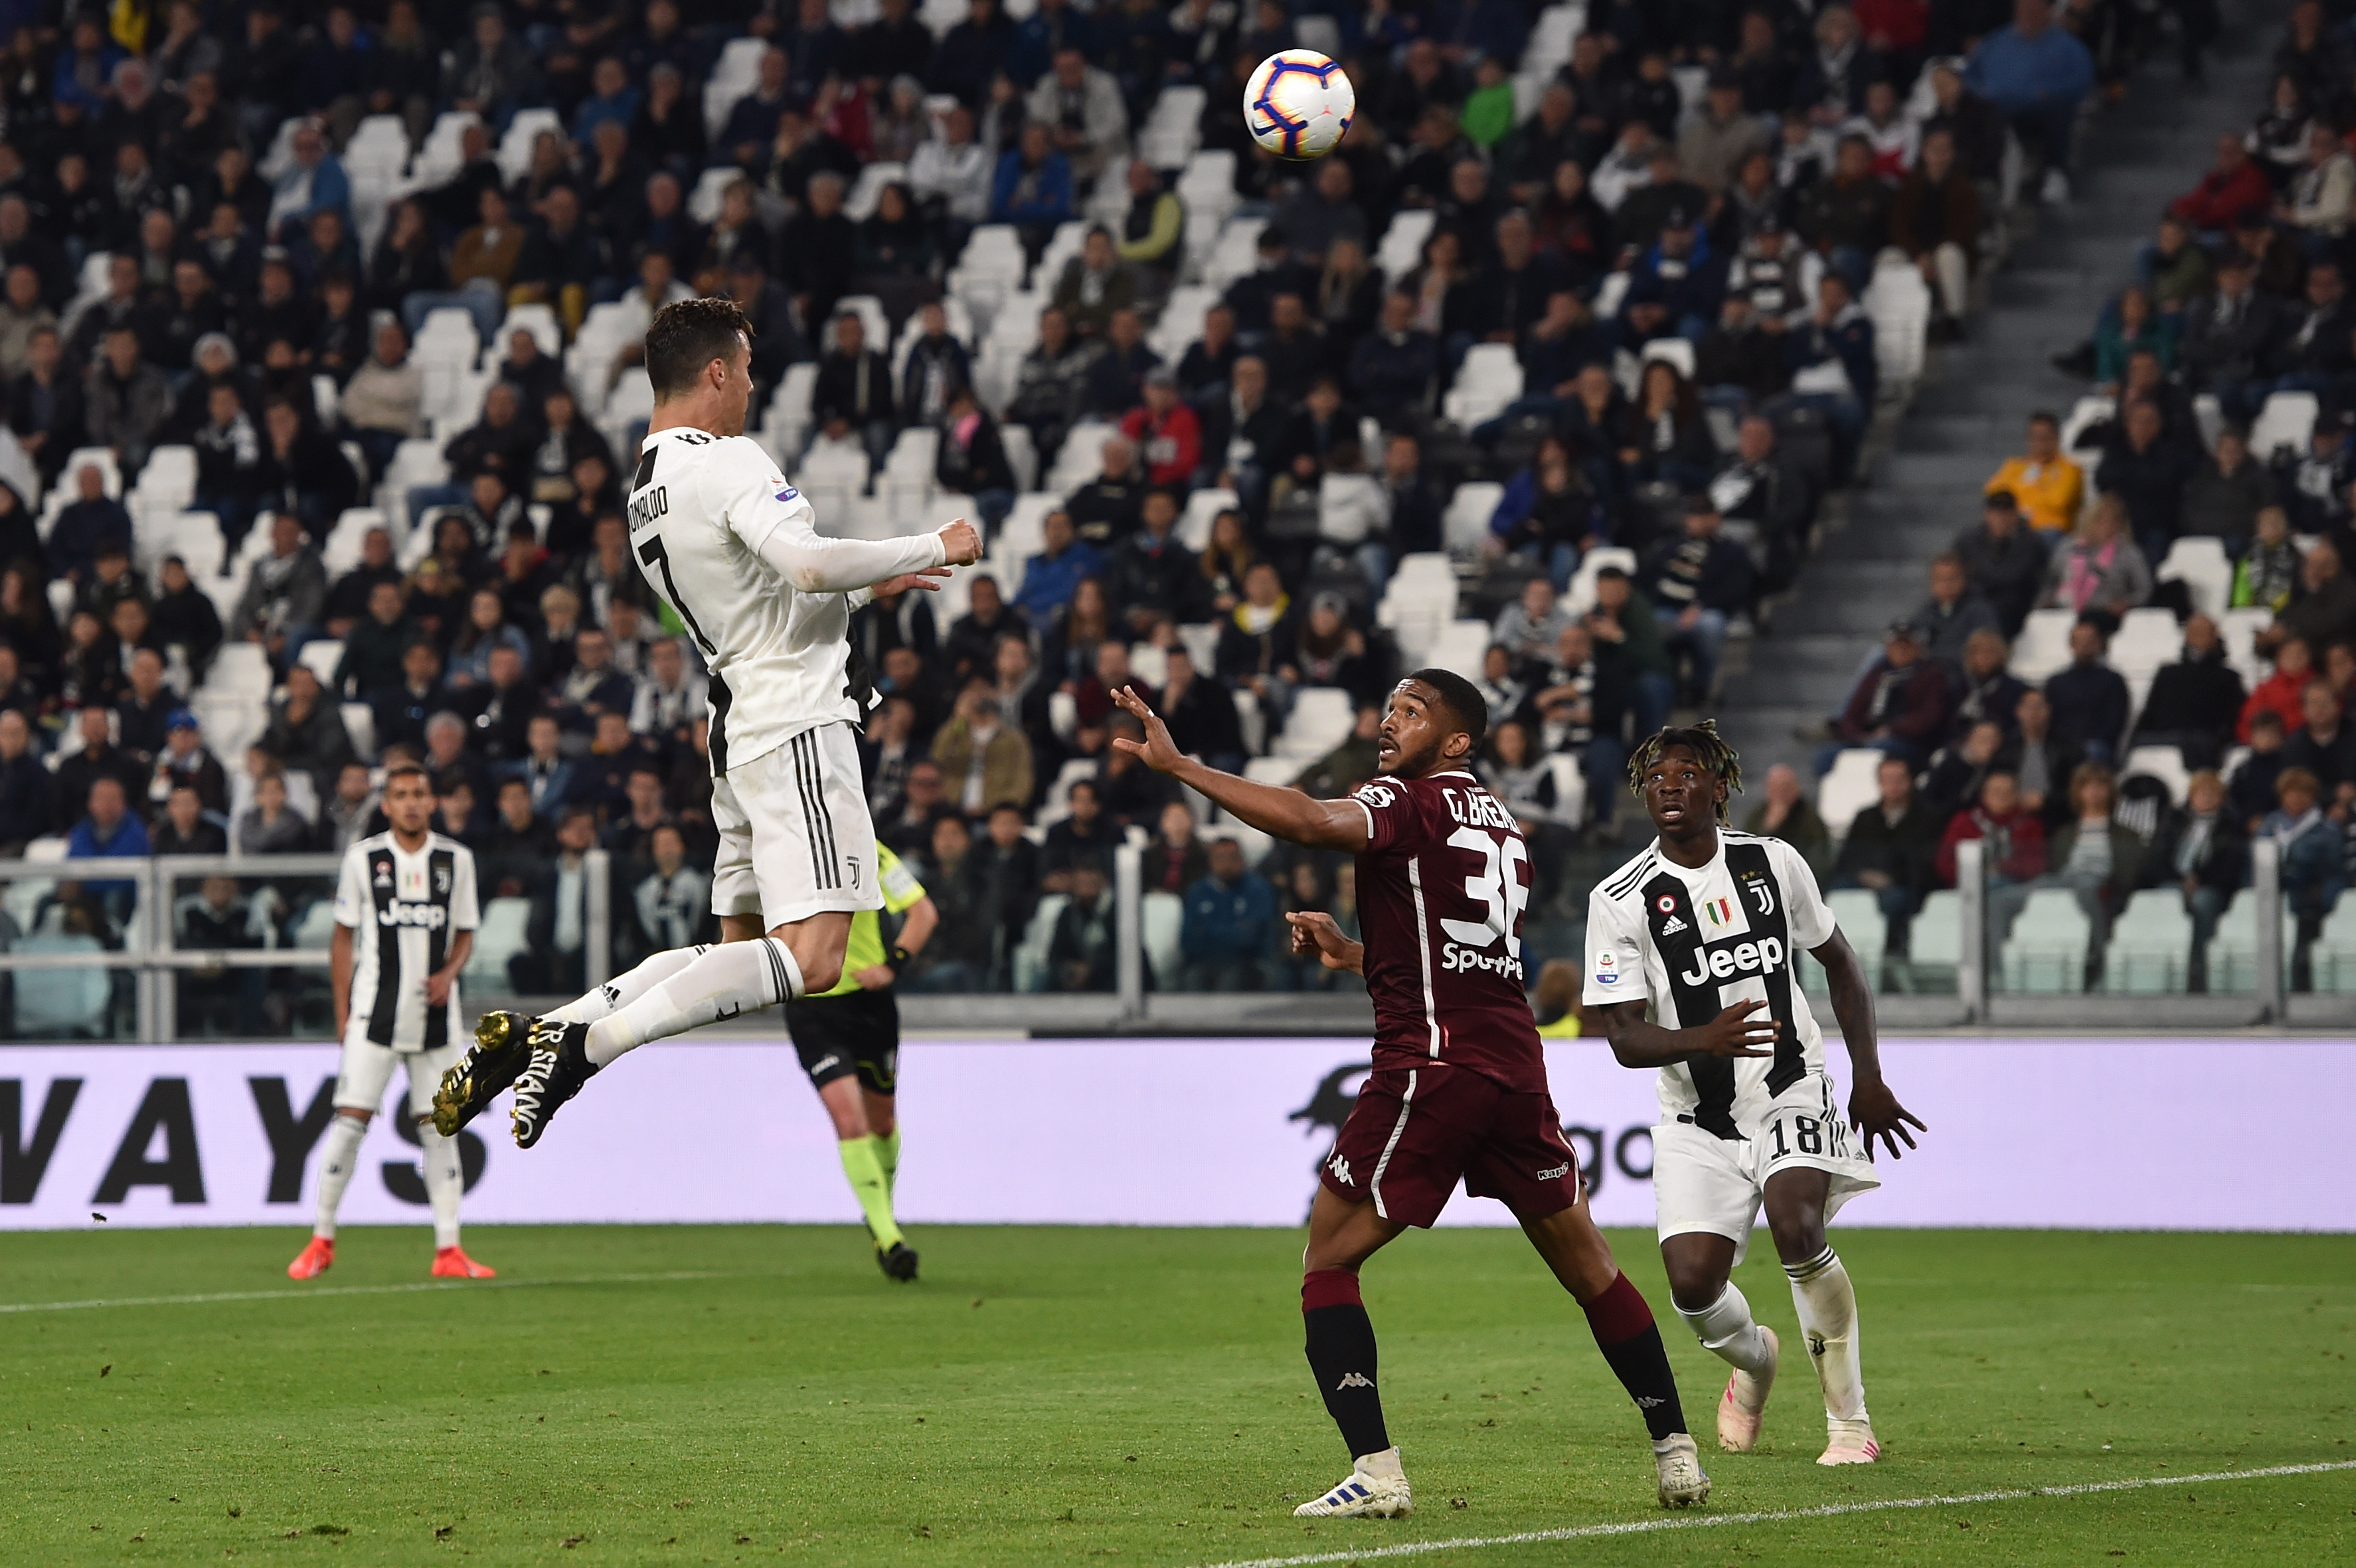 TURIN, ITALY - MAY 03: Cristiano Ronaldo of Juventus scores the equalizing goal during the Serie A match between Juventus and Torino FC on May 03, 2019 in Turin, Italy. (Photo by Tullio M. Puglia/Getty Images)